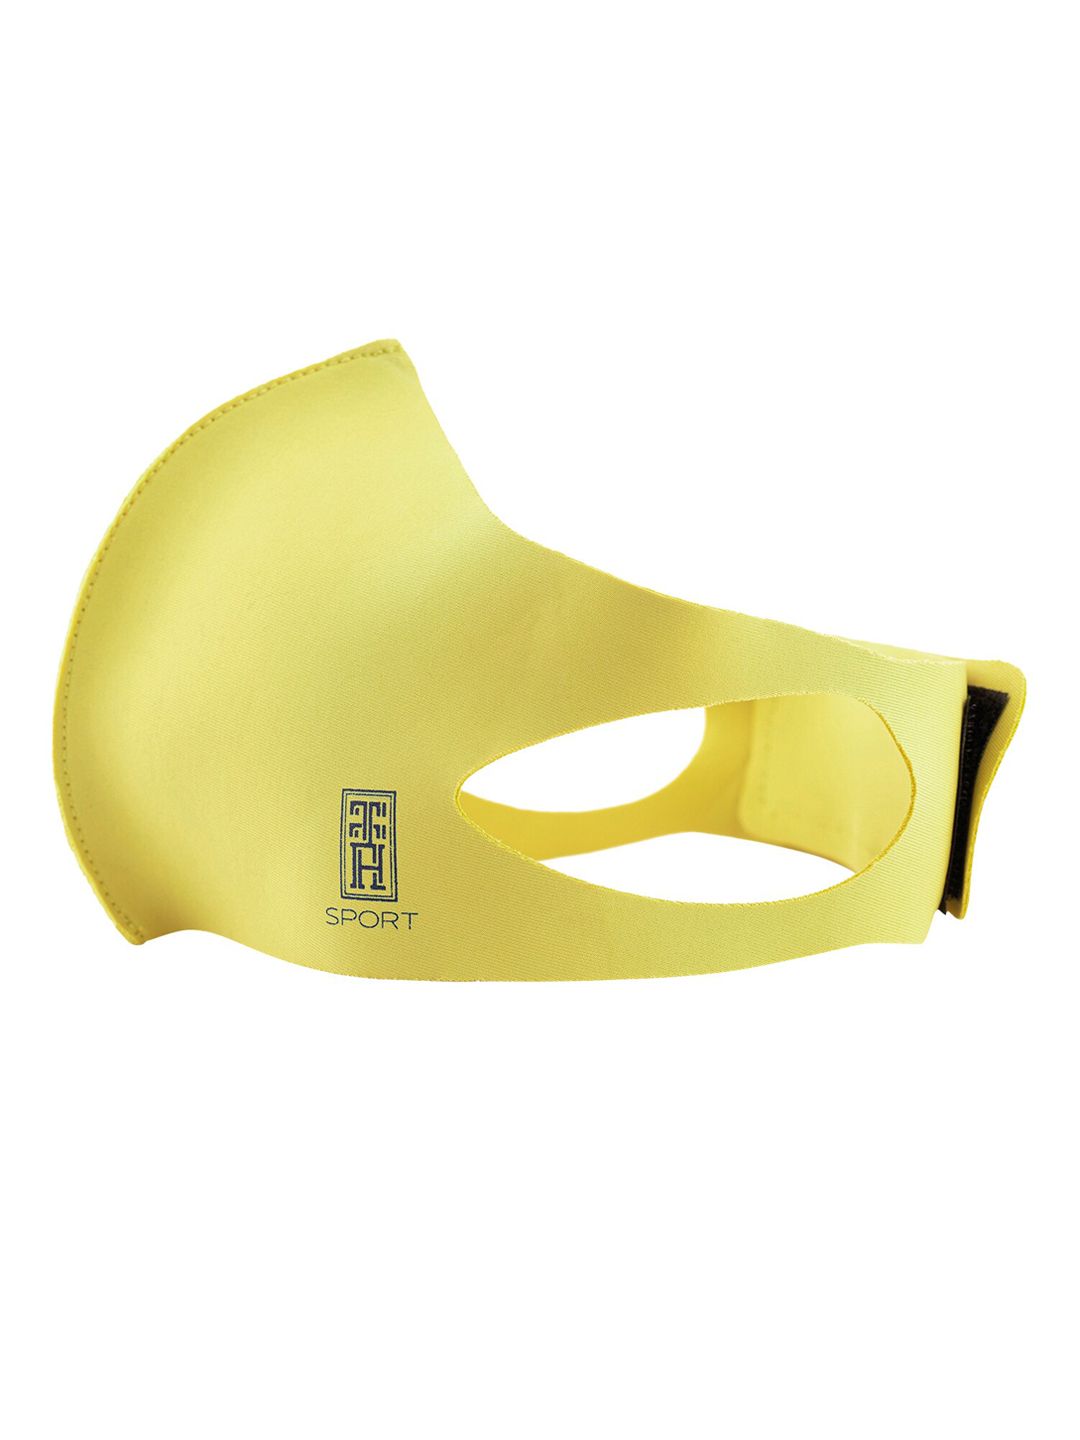 The Tie Hub Unisex Yellow Solid 1-Ply Reusable Neo Sports Cloth Mask With Band Price in India